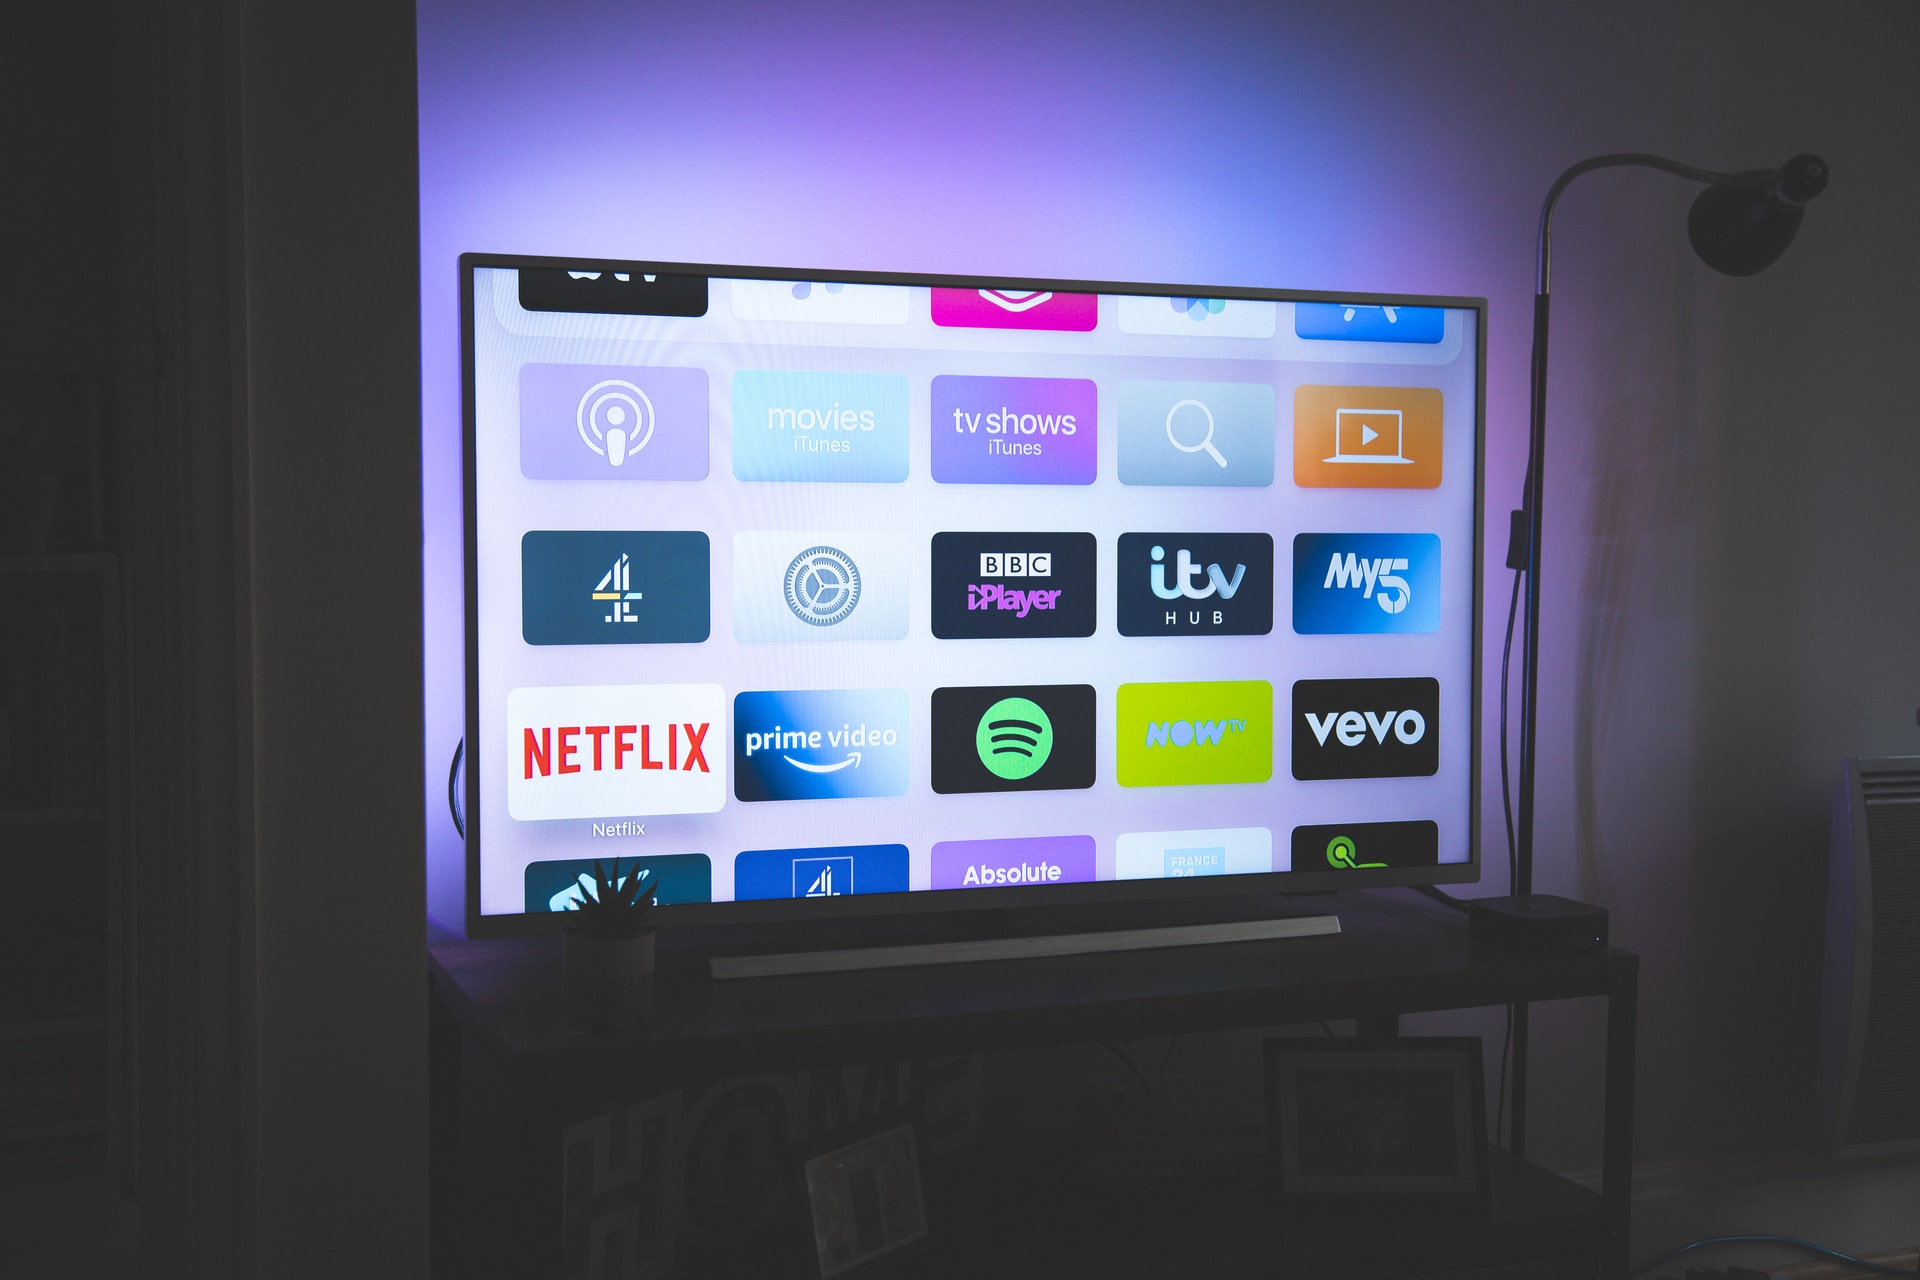 Best Live TV Streaming Services: Compare Top Picks for 2021